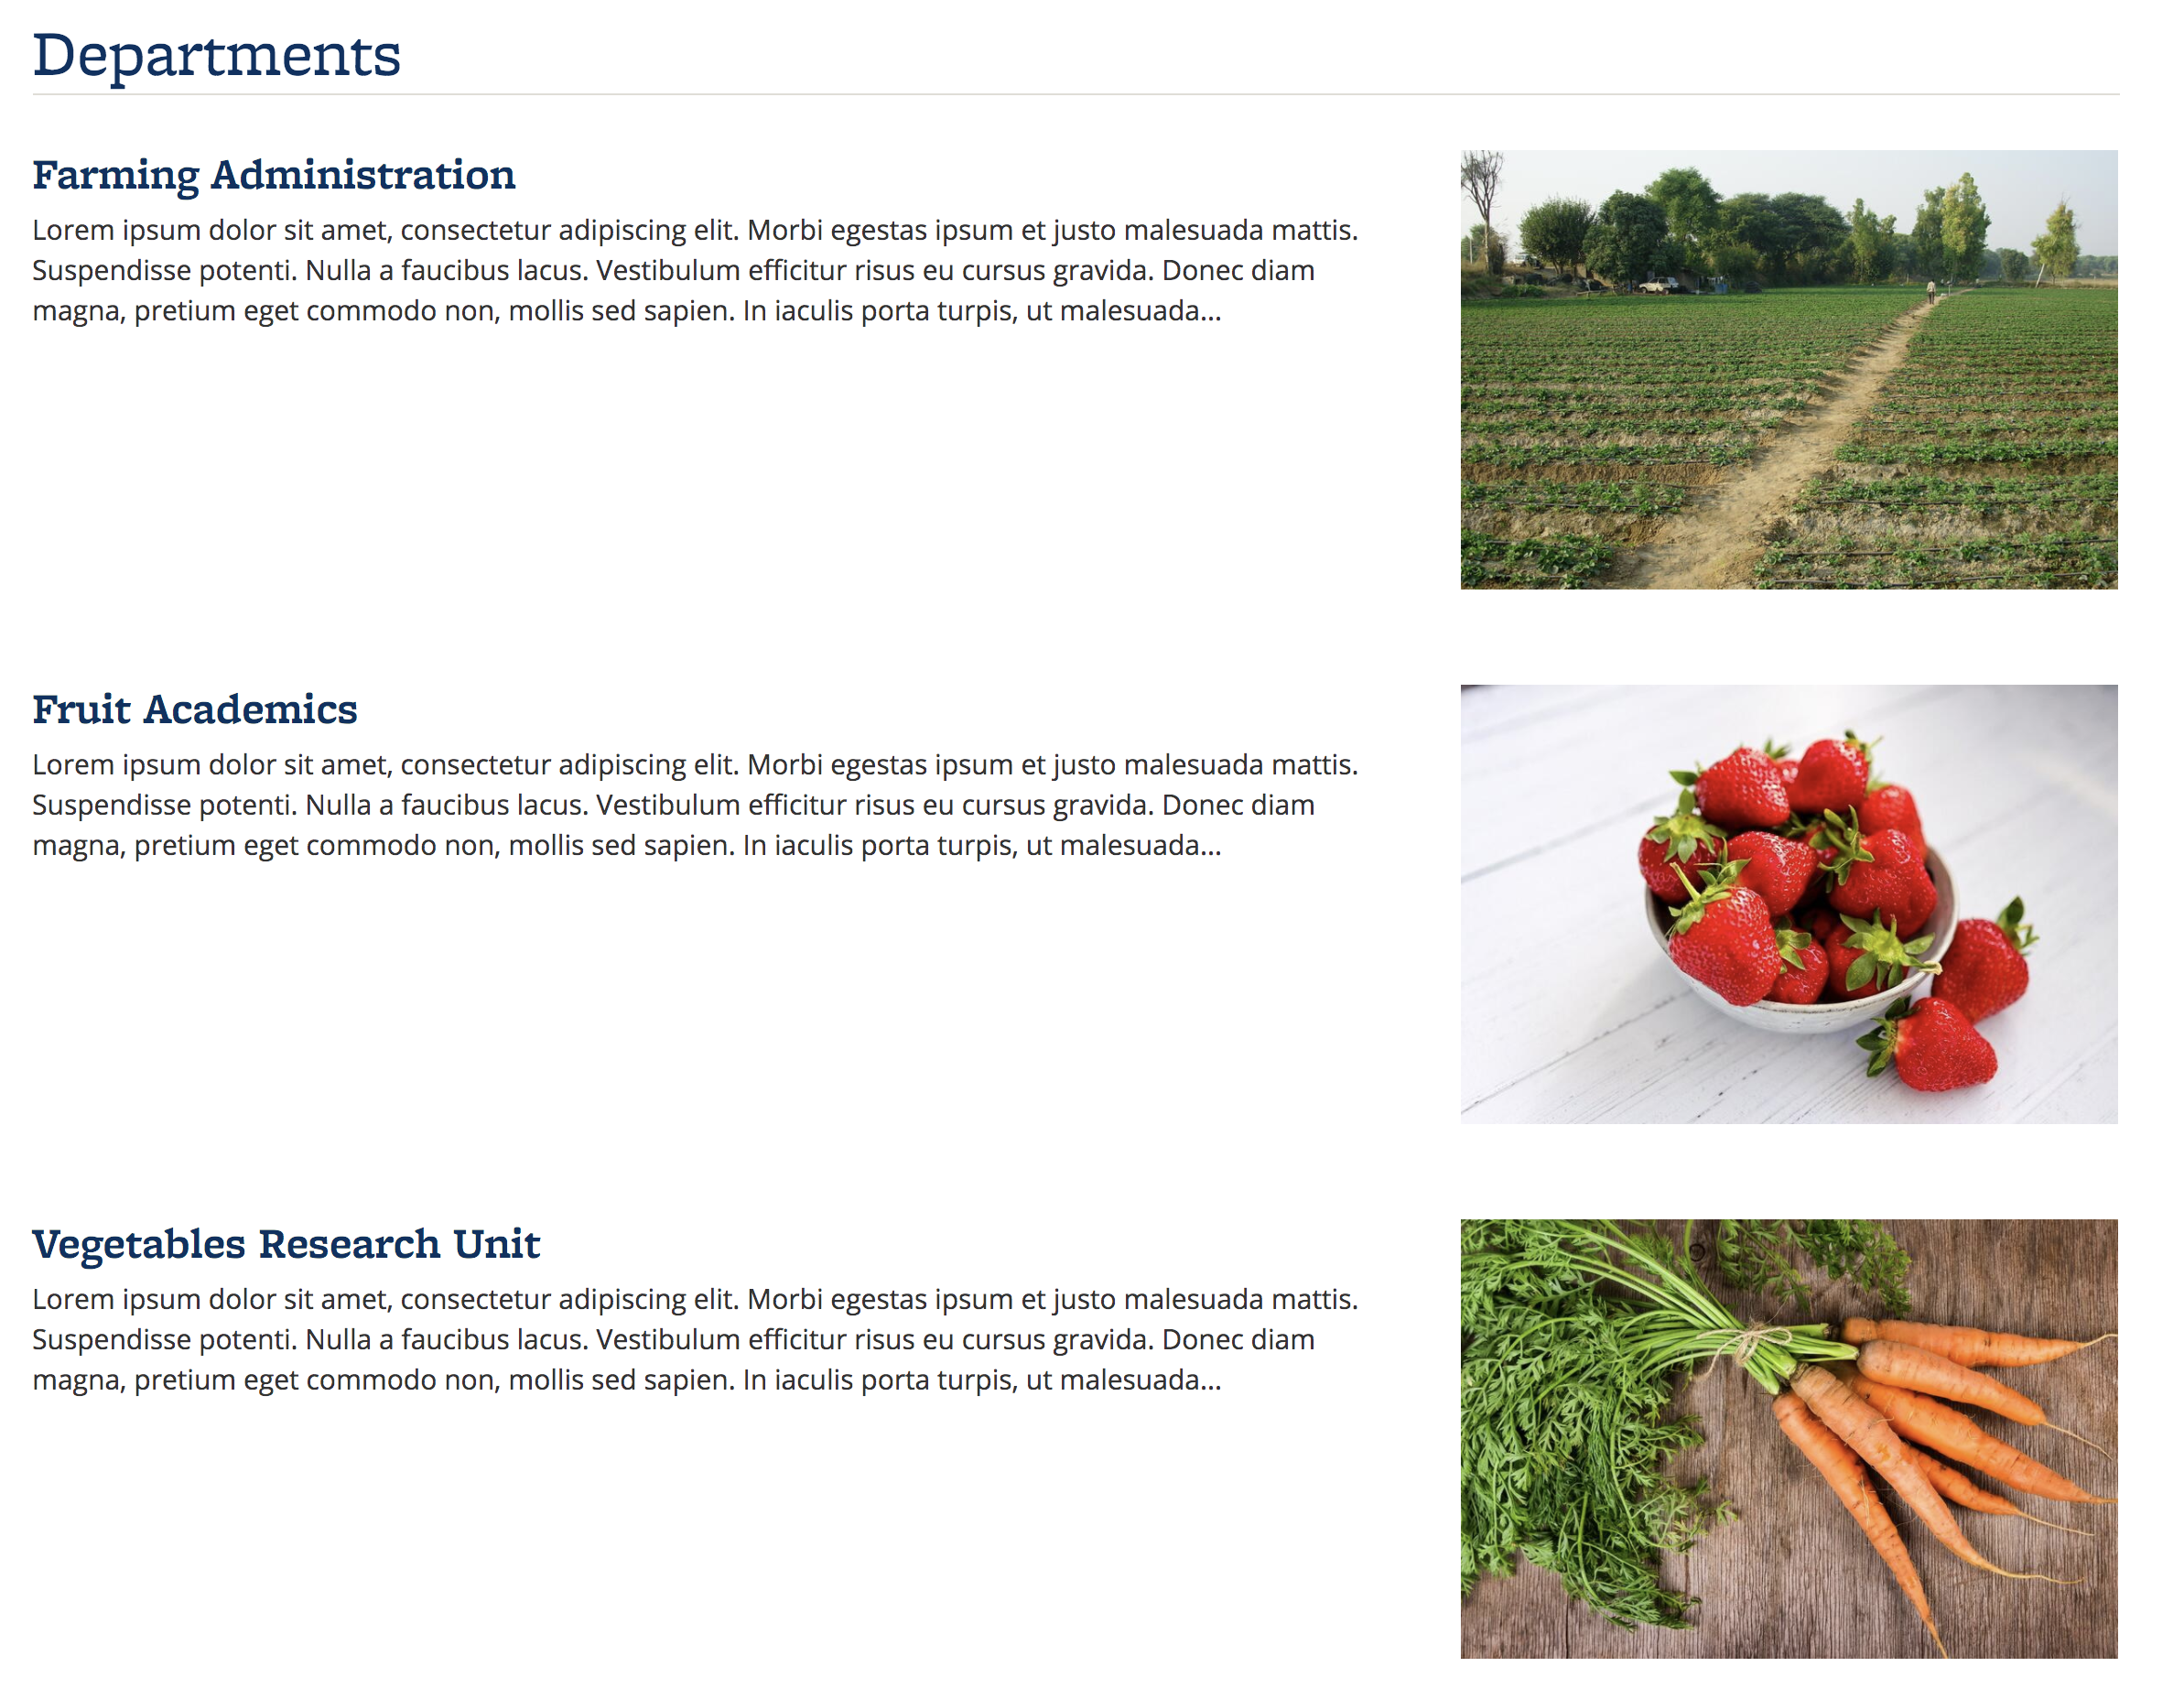 Screenshot of Departments content, with featured images